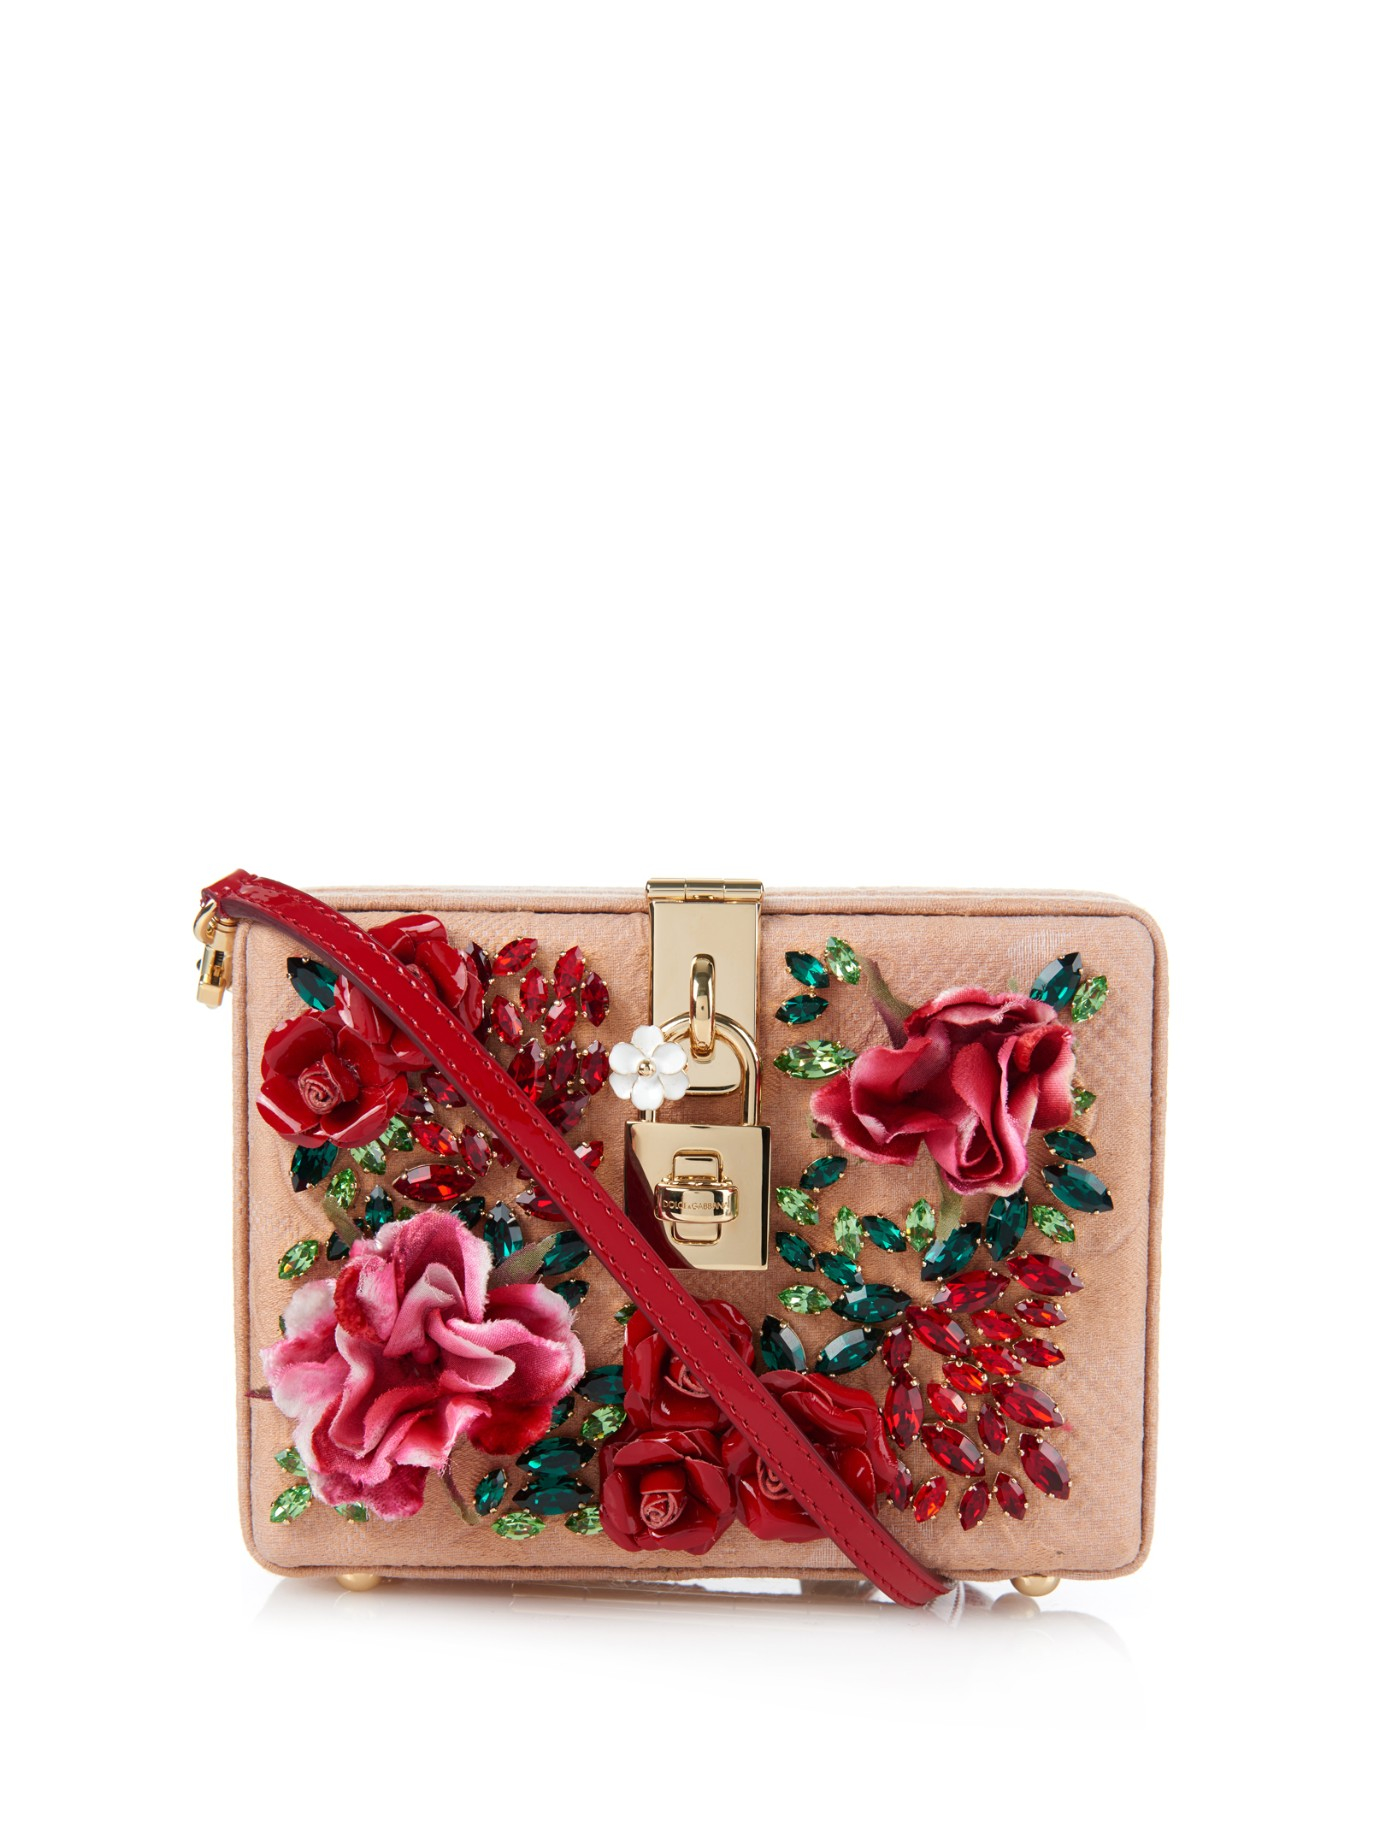 Lyst - Dolce & Gabbana Mini Dolce Embellished Cross-body Bag in Red